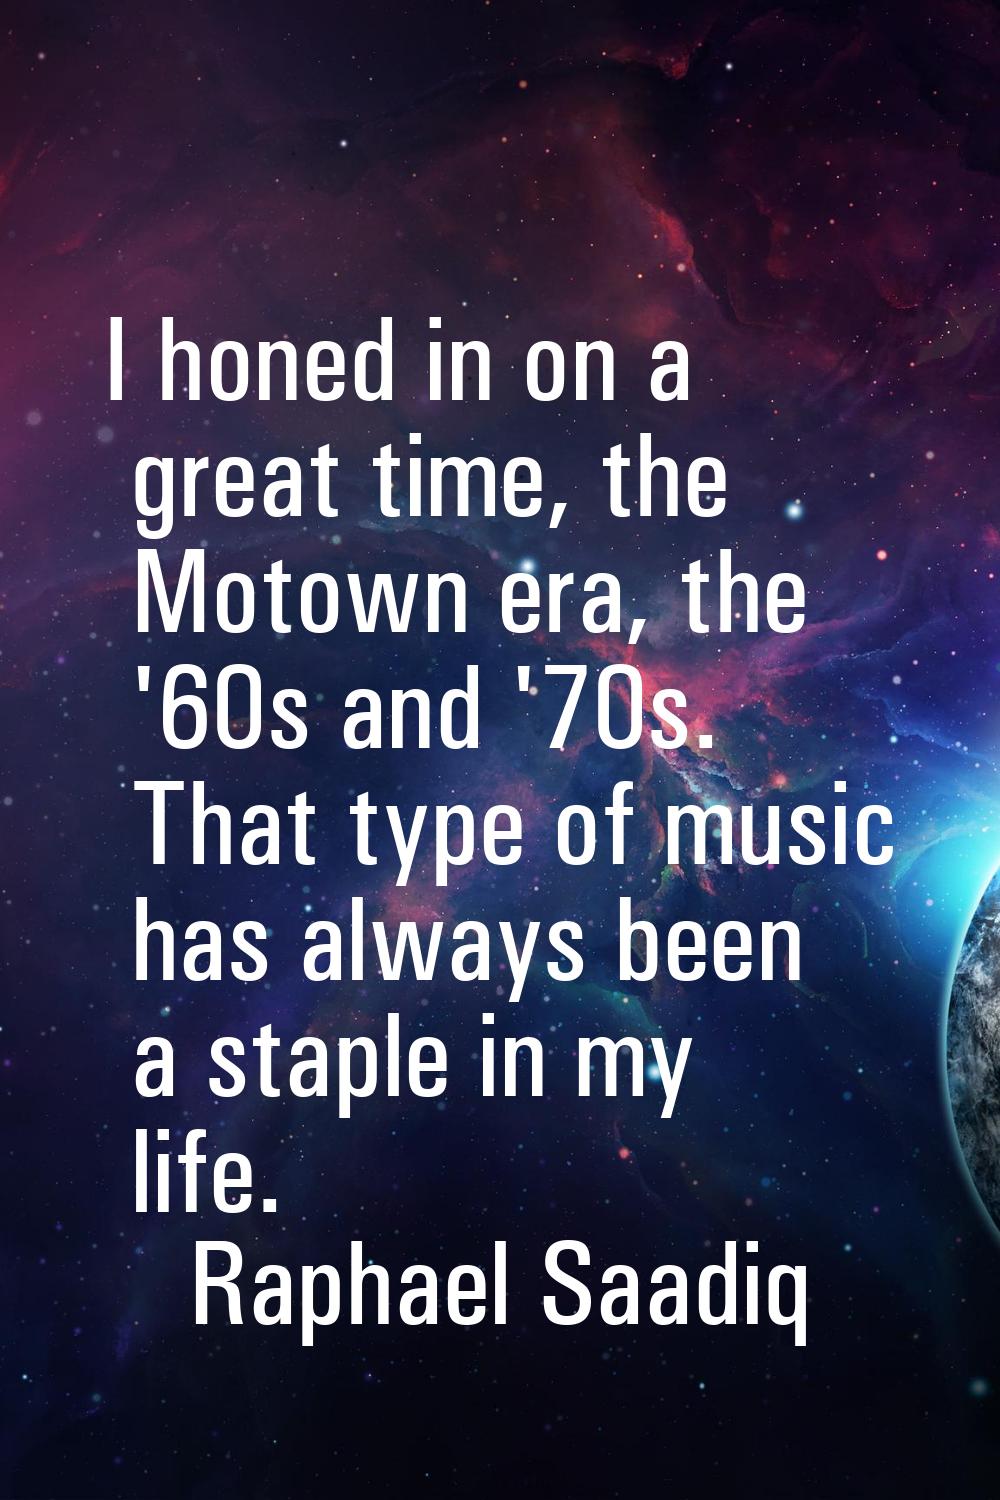 I honed in on a great time, the Motown era, the '60s and '70s. That type of music has always been a